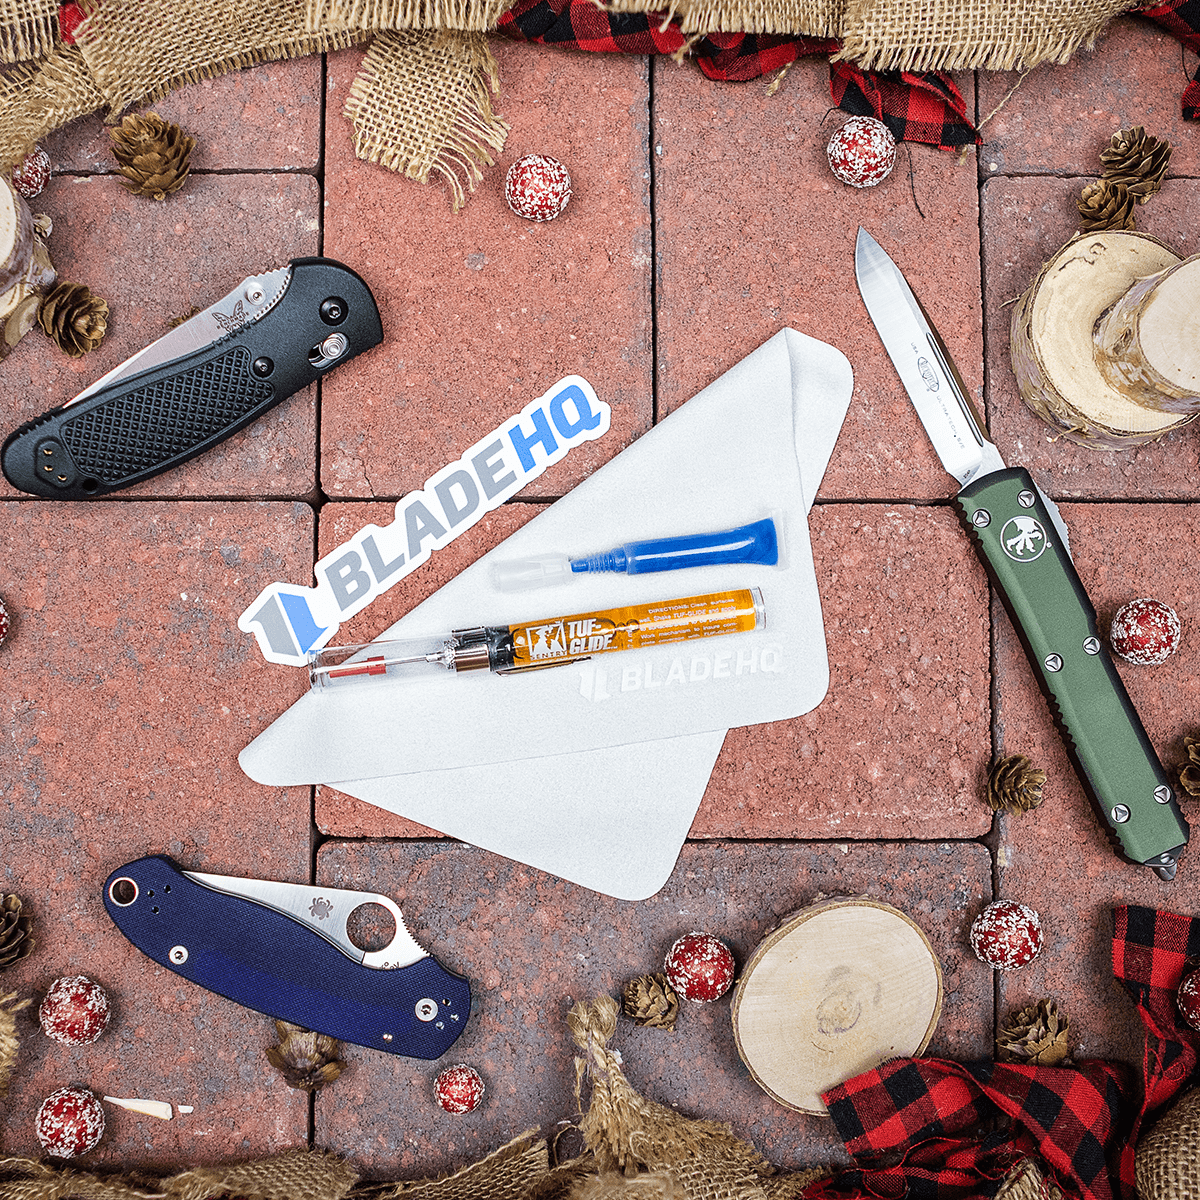 FREE Knife Care Kit with Orders over $75! These care kits include two polishing cloths, blue threadlocker, Tuf-Glide lube, and a fancy Blade HQ sticker. All the necessities to keep your knives happy!

#bladehq #knifelife #knifemaintenance #loctite #tufglide #giveaway #holidaysale